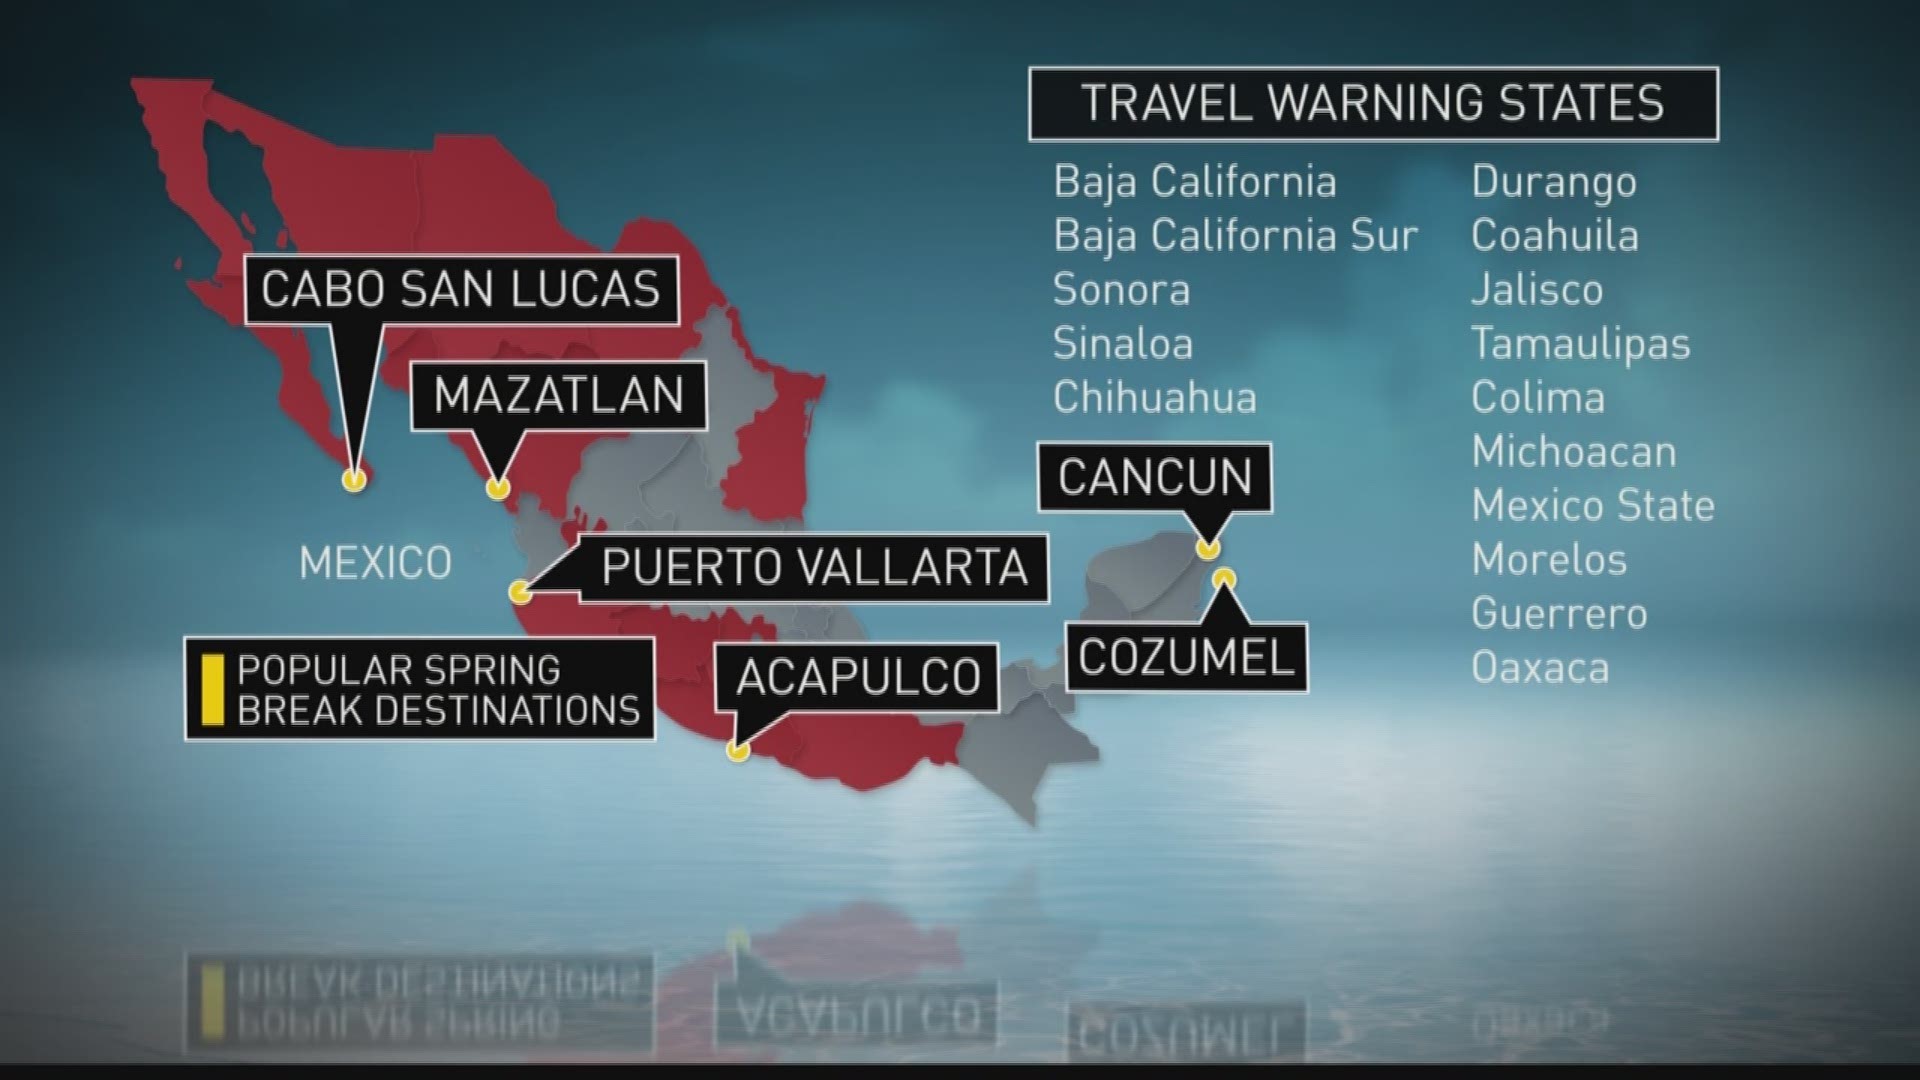 Travel warning issued for parts of Mexico